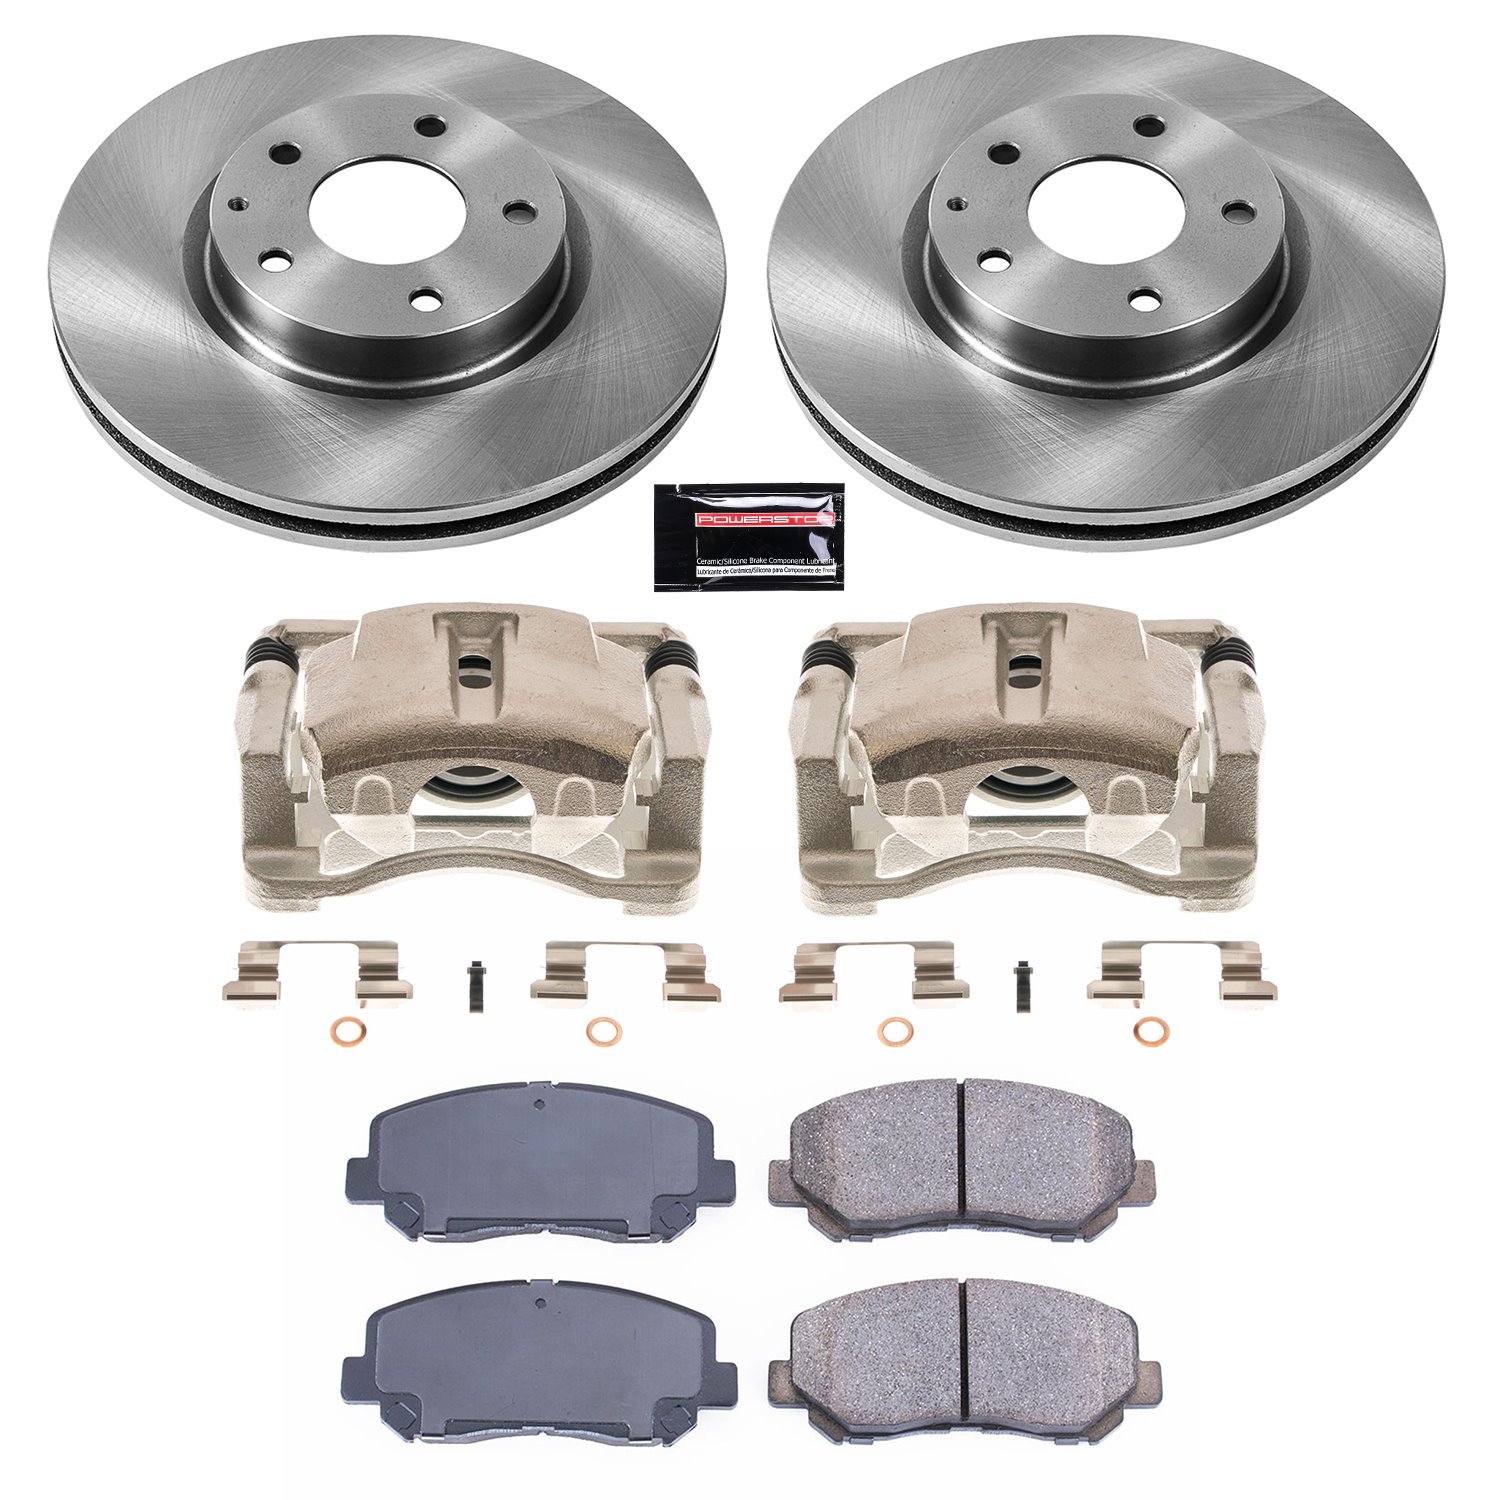 KCOE6967 Autospecialty OE Replacement Brake Kit Fits 2013-2015